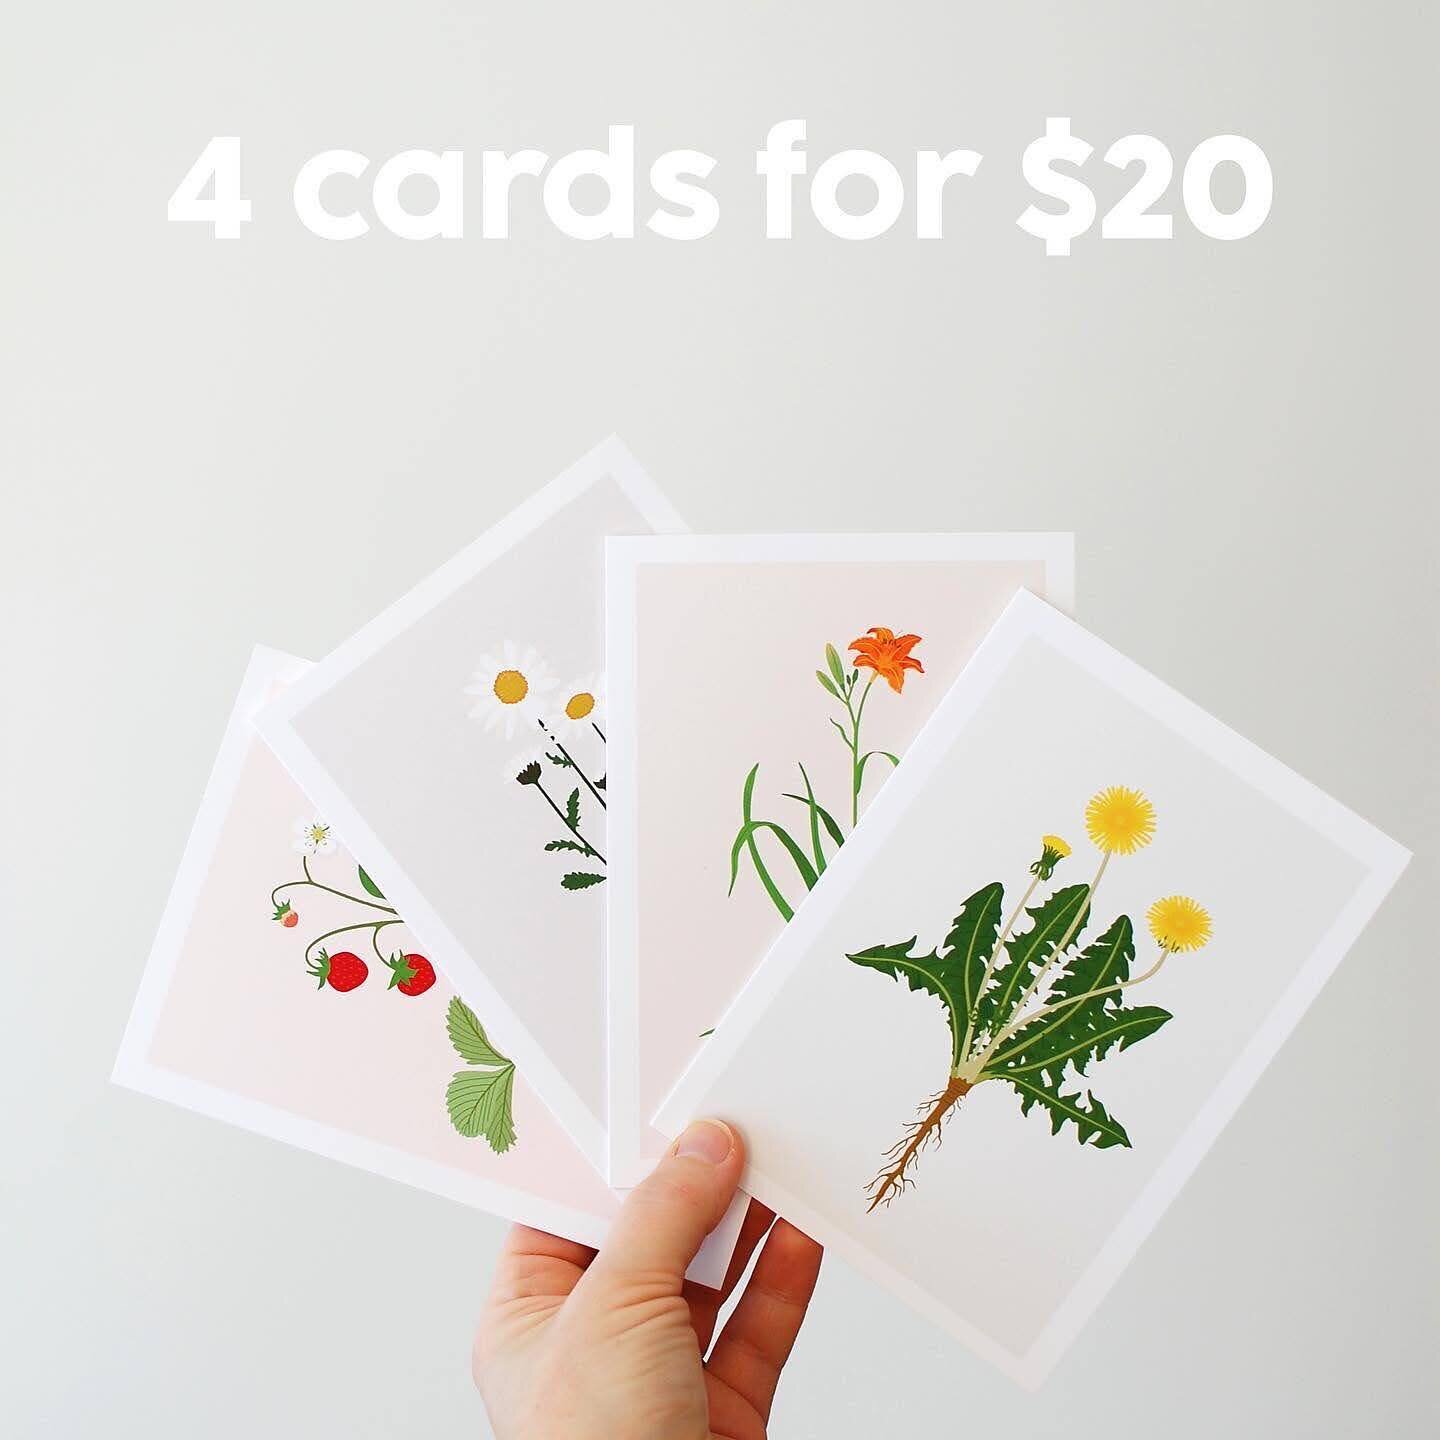 Send summer-y greetings to all your pals 🌻 Pick any four cards for only $20! Each card includes a description of the native flower on the back, so we can all learn a little more about the plants around us. Available now in my shop 🌿

besscallard.ca